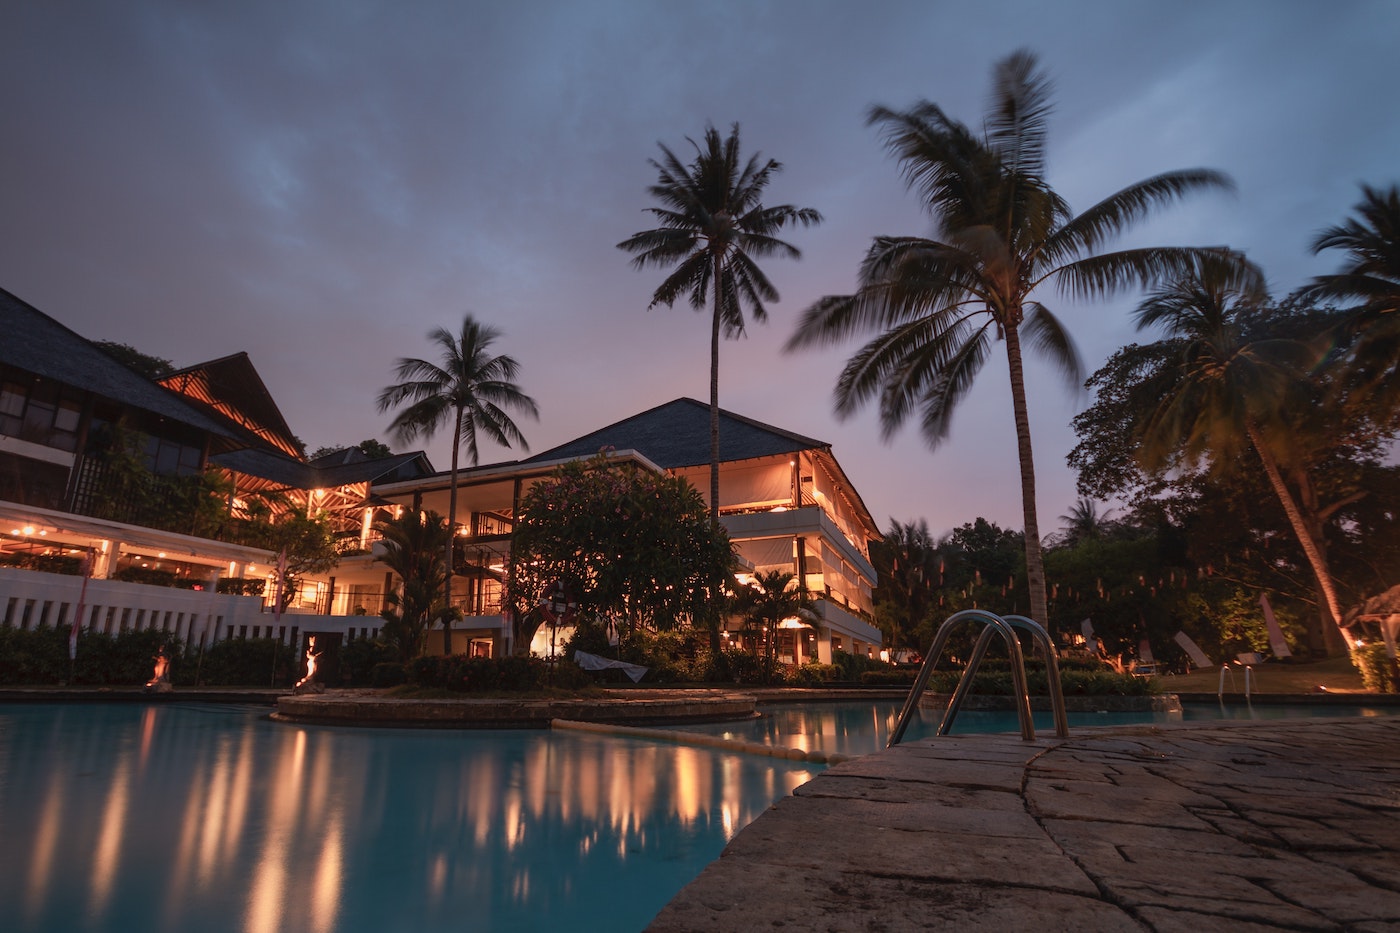 Night time view of exterior of resort with swimming pool, night lighting, and palm trees